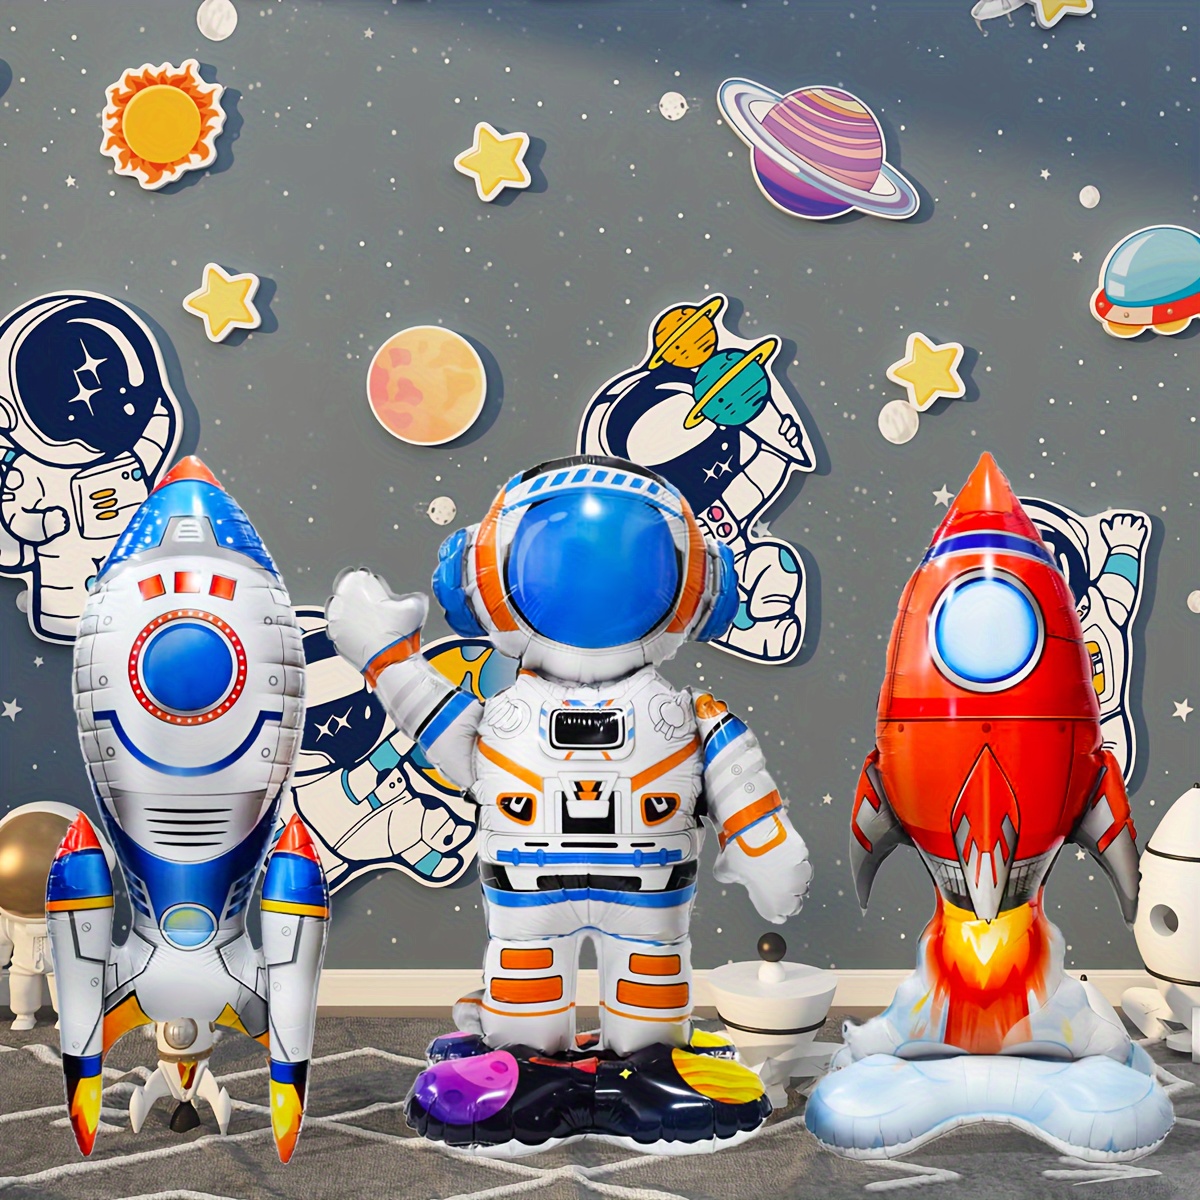 

3pcs, Rocket Astronaut Foil Balloon Set, Outer Space Theme Birthday Party Decoration, Baby Shower Decoration, Home Room Decor